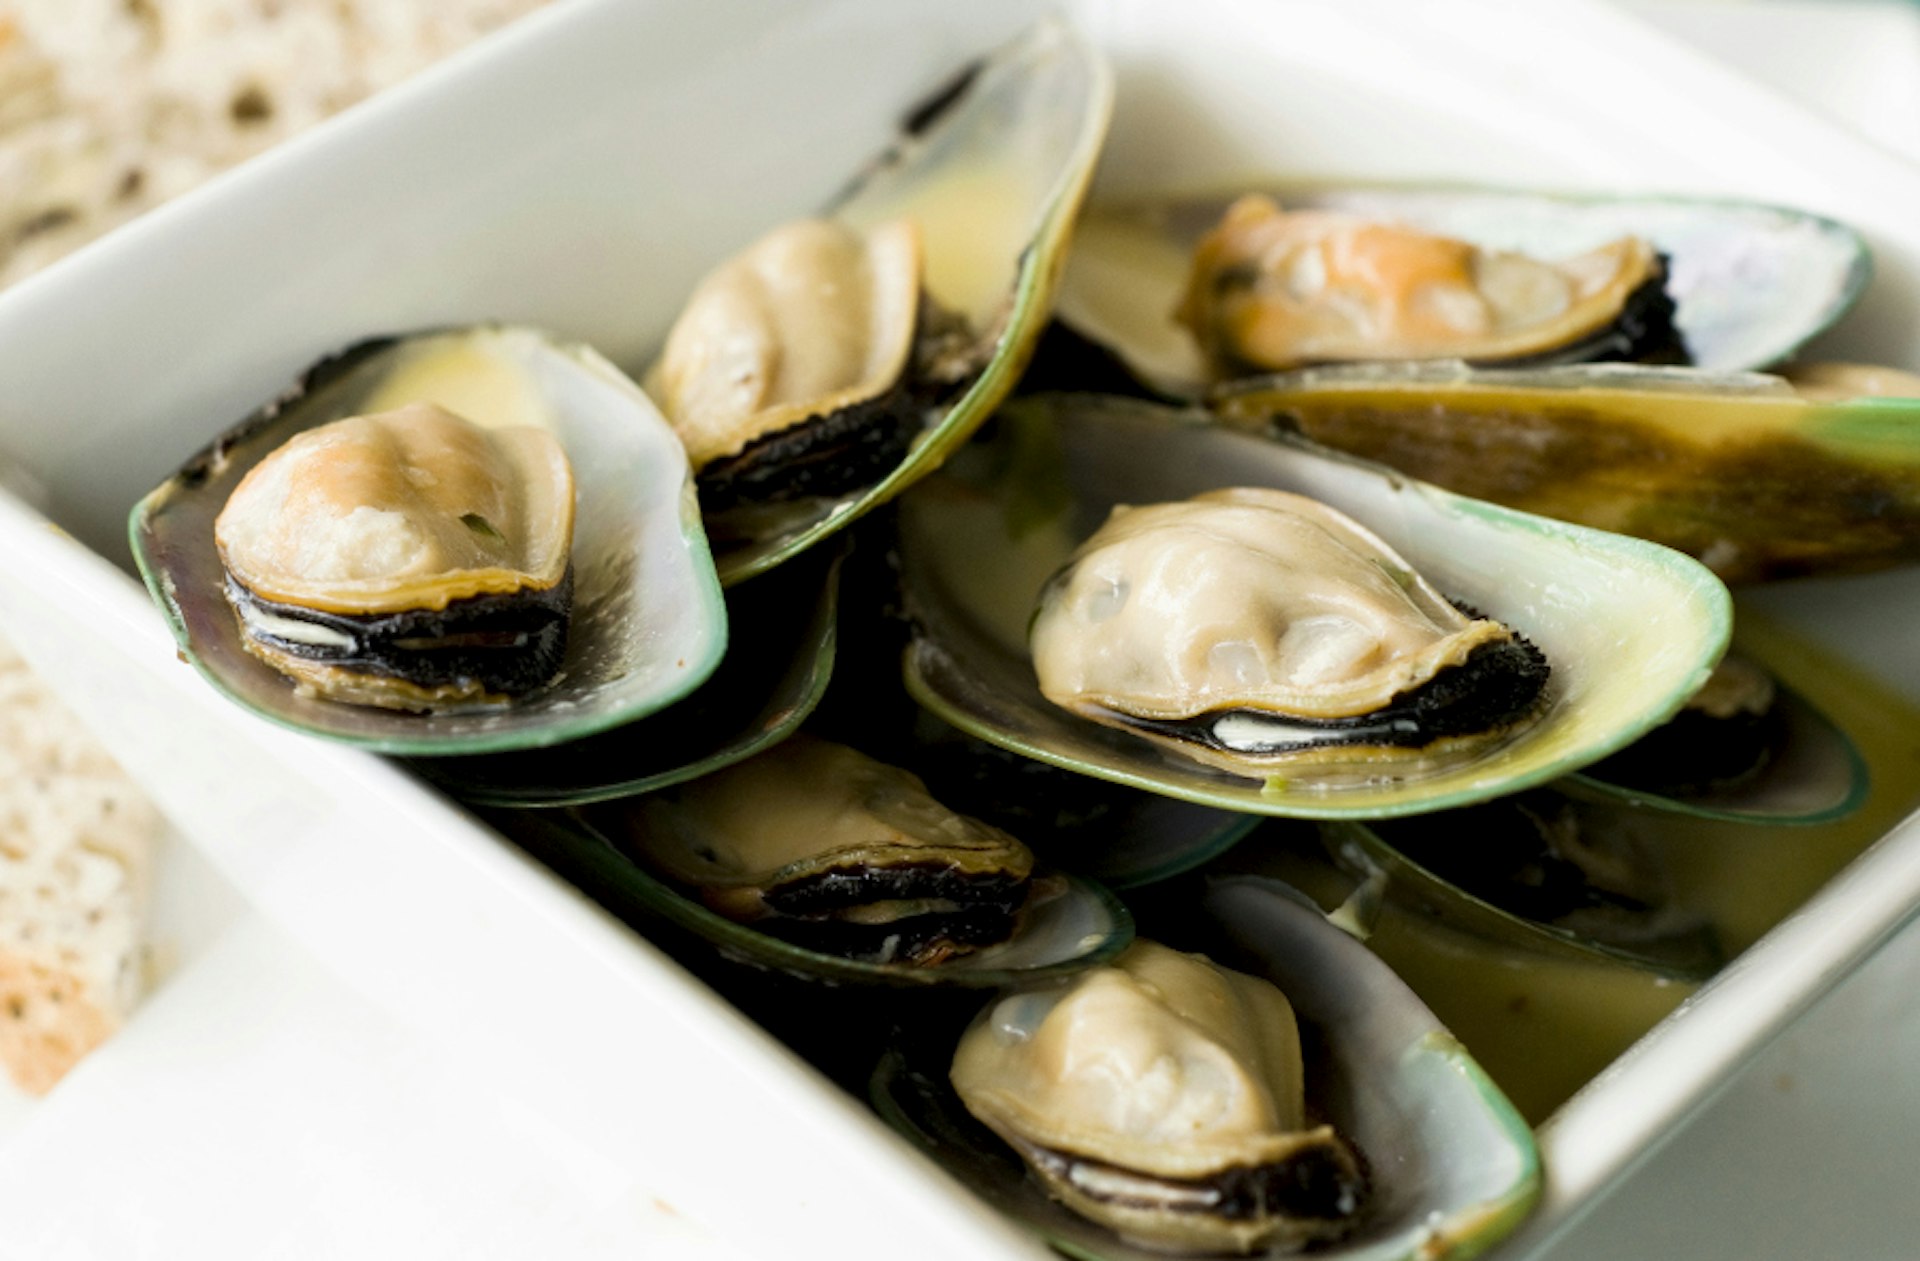 New Zealand's famous green lipped mussels. Image by georgeclerk / Getty Images